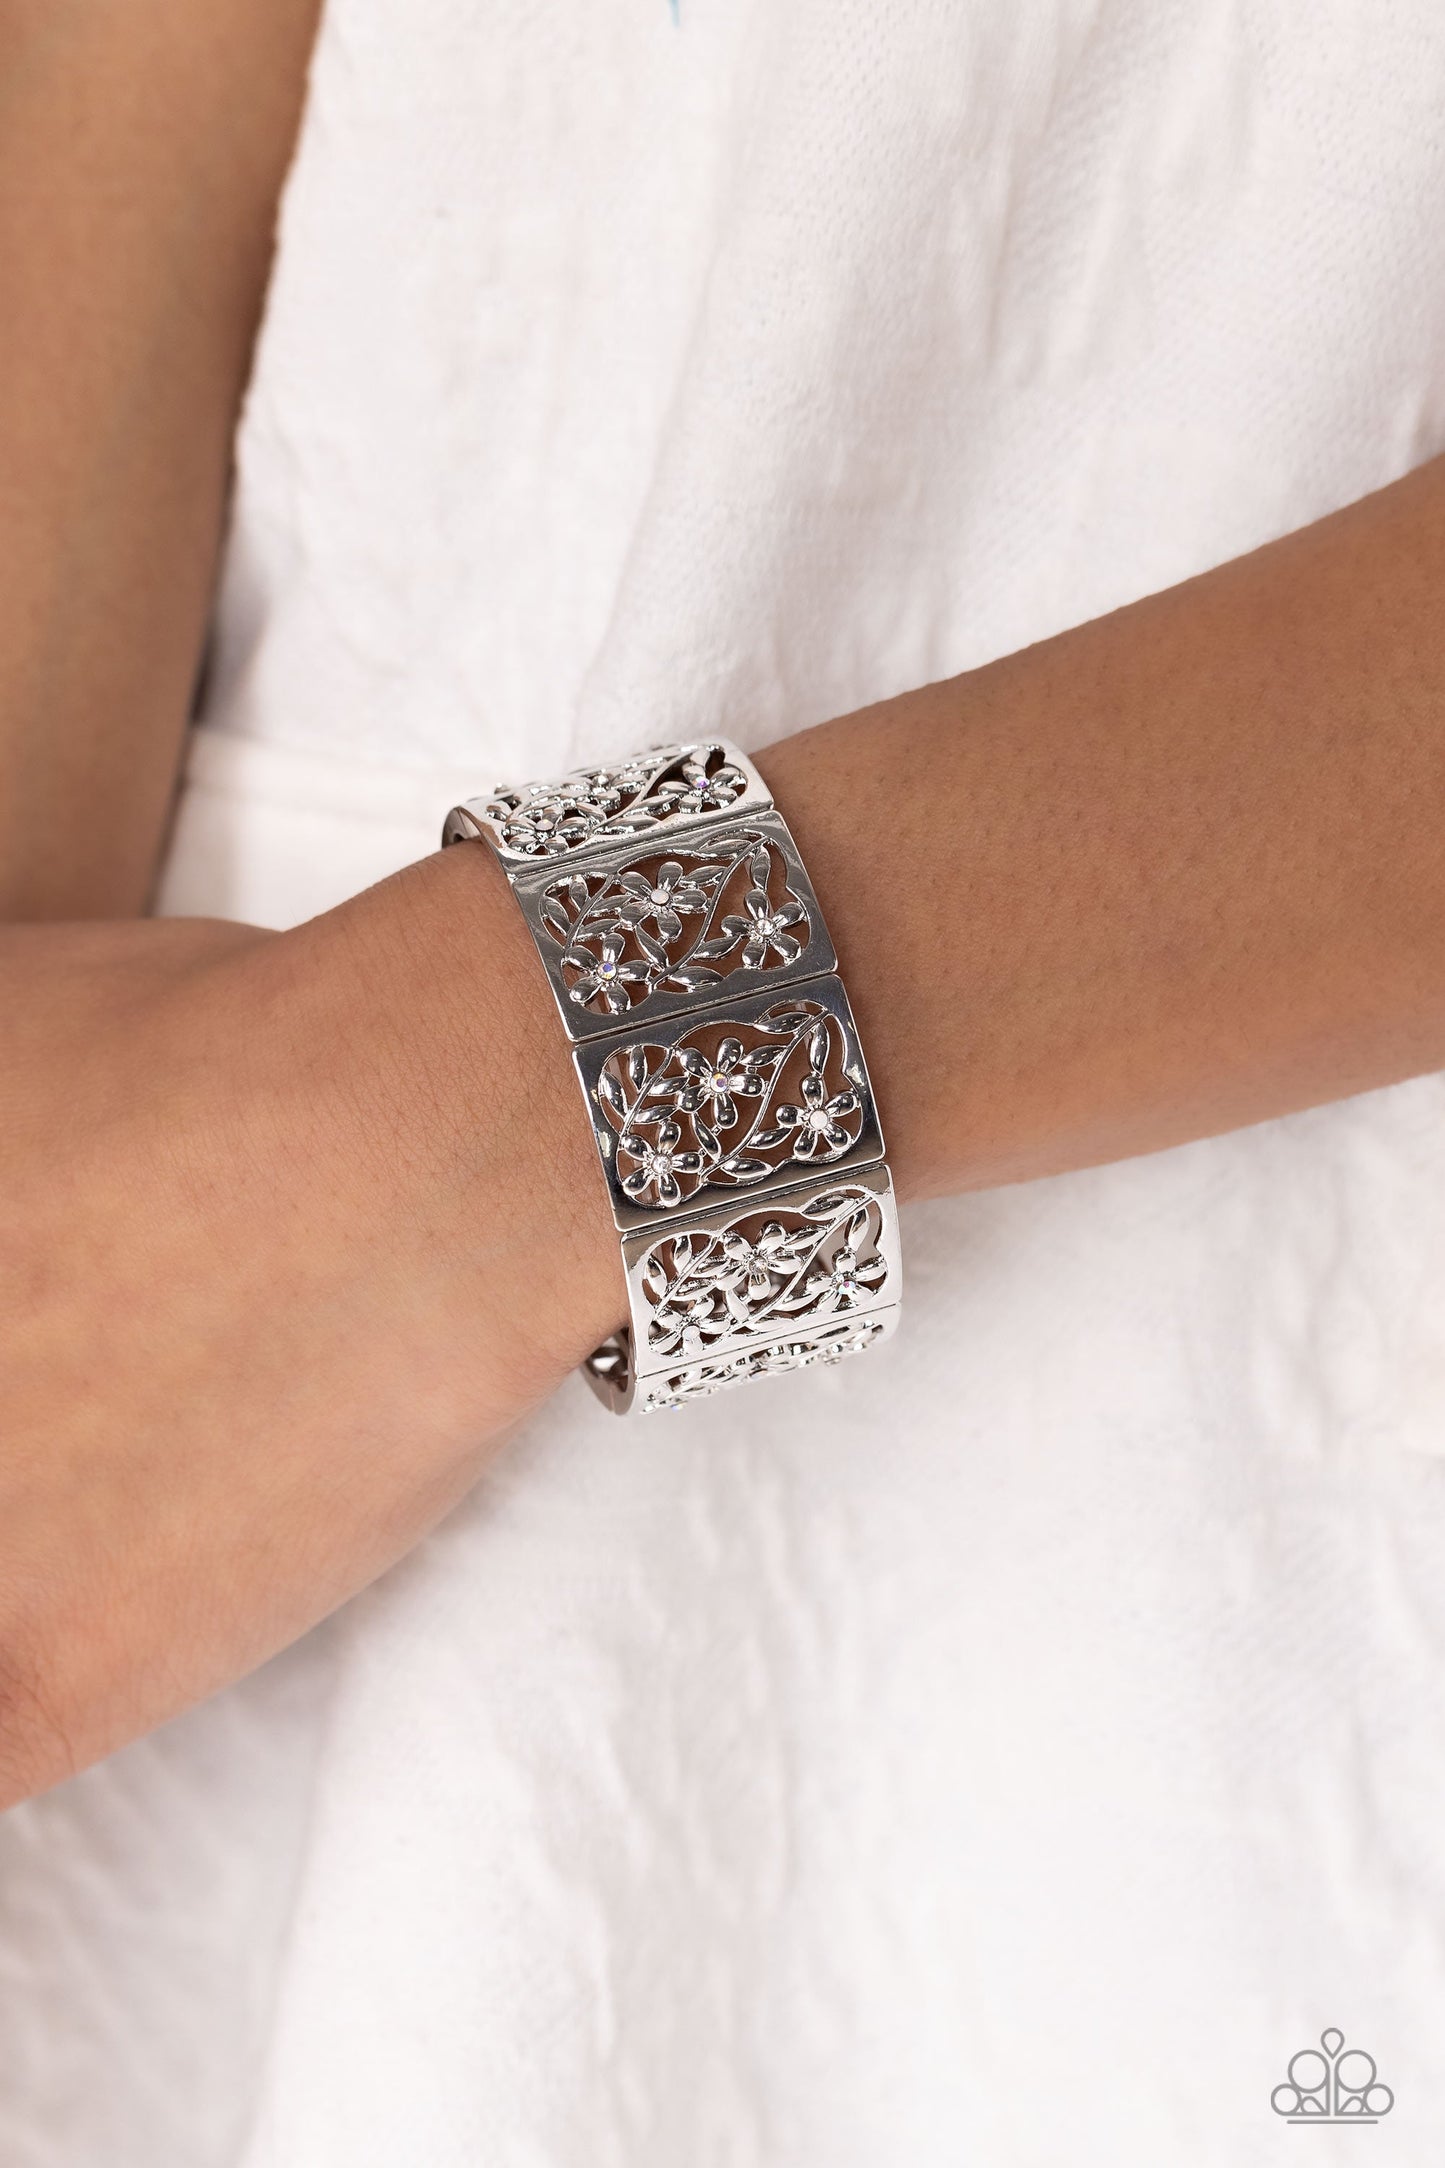 Garden Walls - White Iridescent and Silver Bracelet - Paparazzi Accessories - Sleek silver frames, filled with whimsical leafy floral filigree and opalescent, white, and iridescent rhinestones, stack around the wrist on an elastic stretchy band for a dainty handcrafted statement.